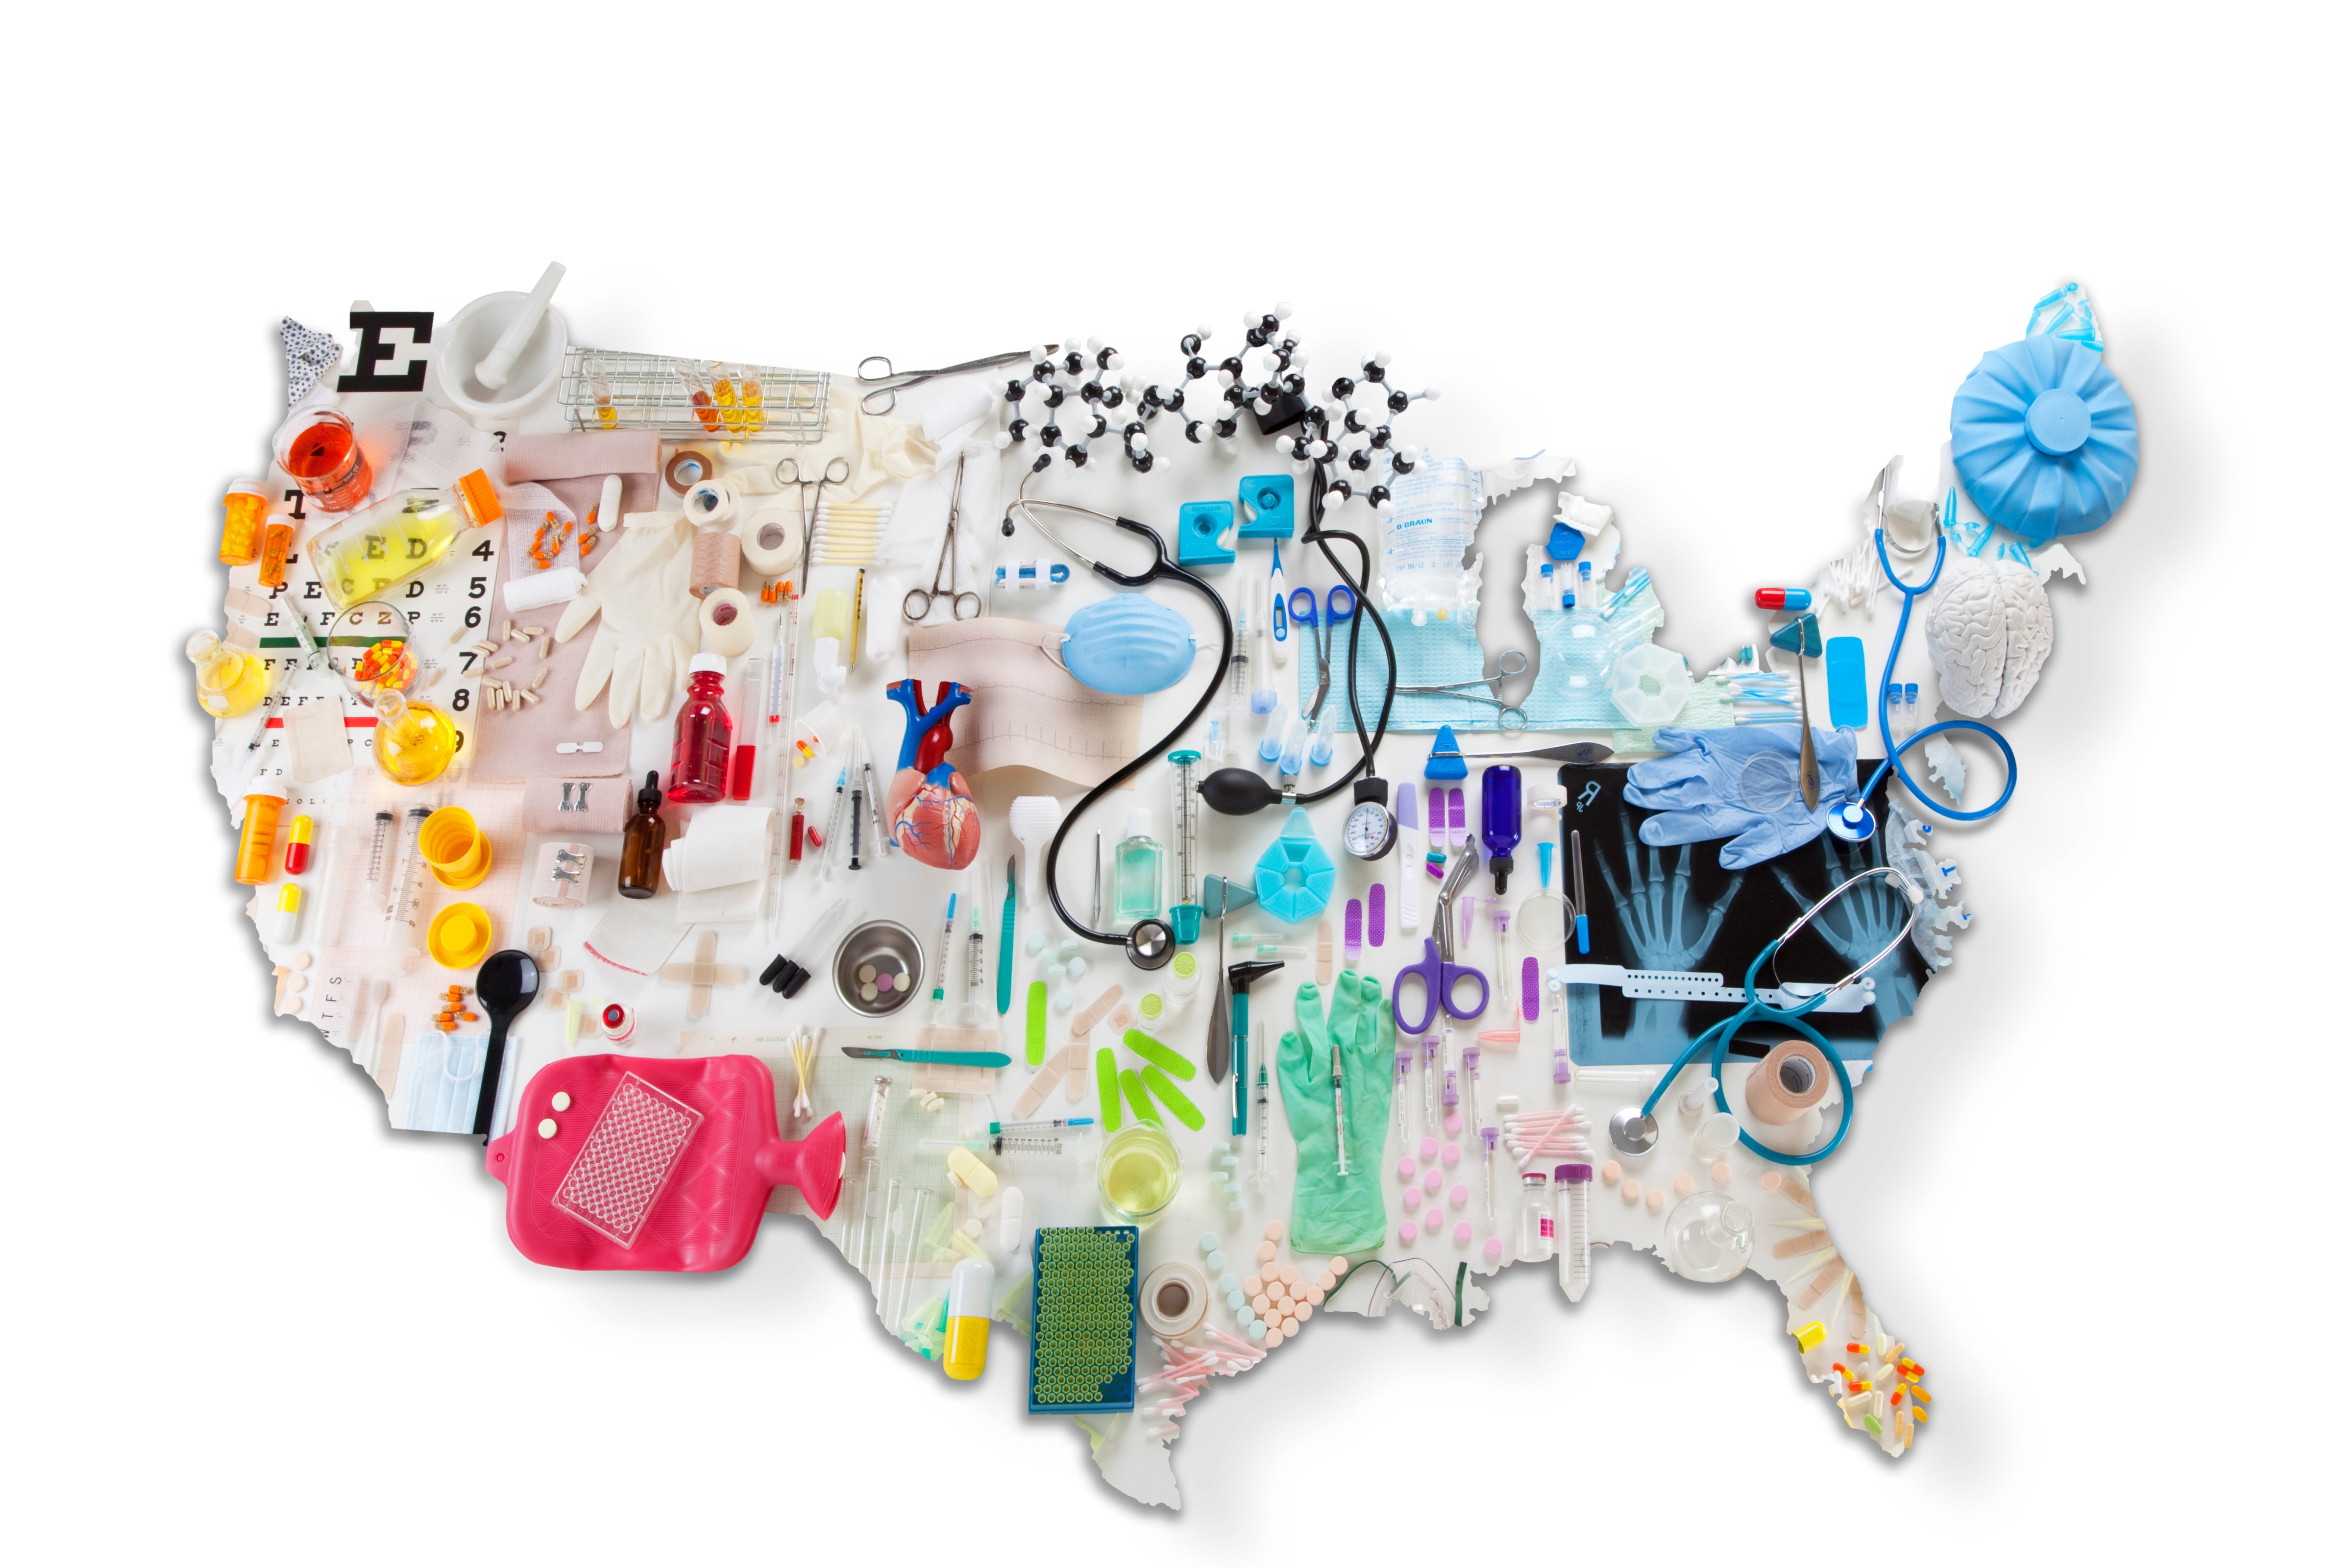 US map made of medical tools and healthcare items